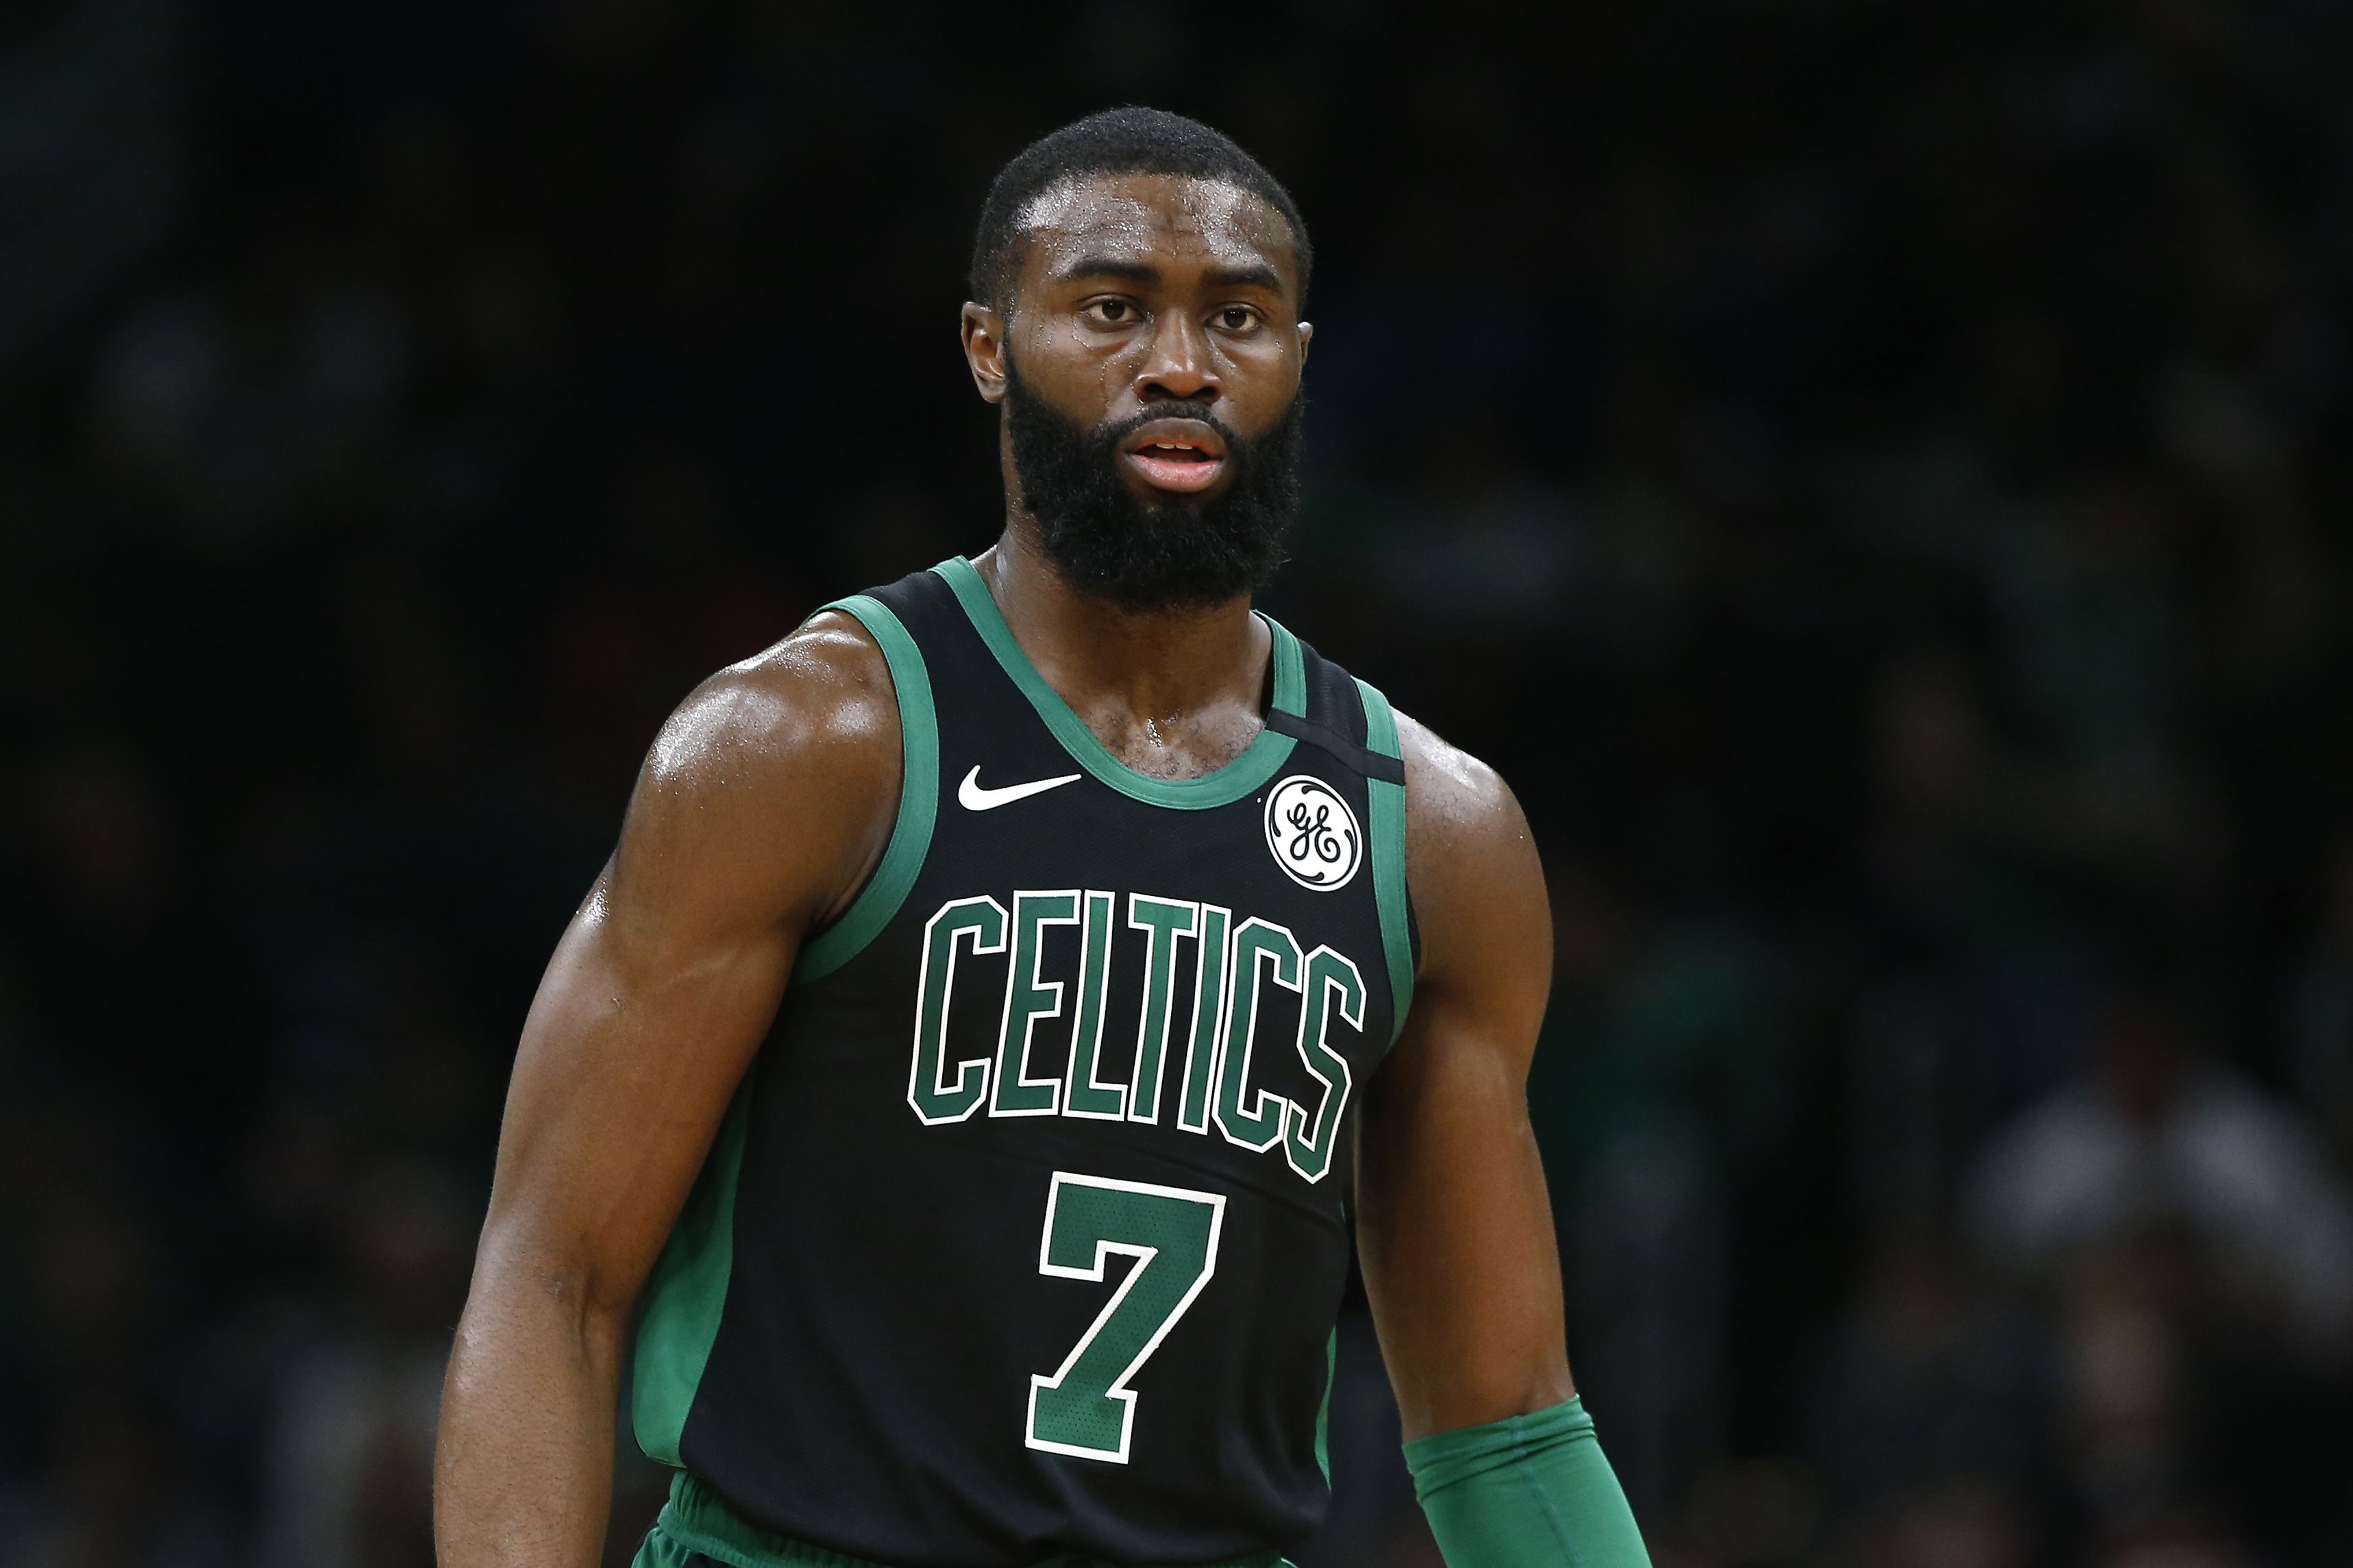 Boston Celtics: Jaylen Brown listed as an 'honorable mention